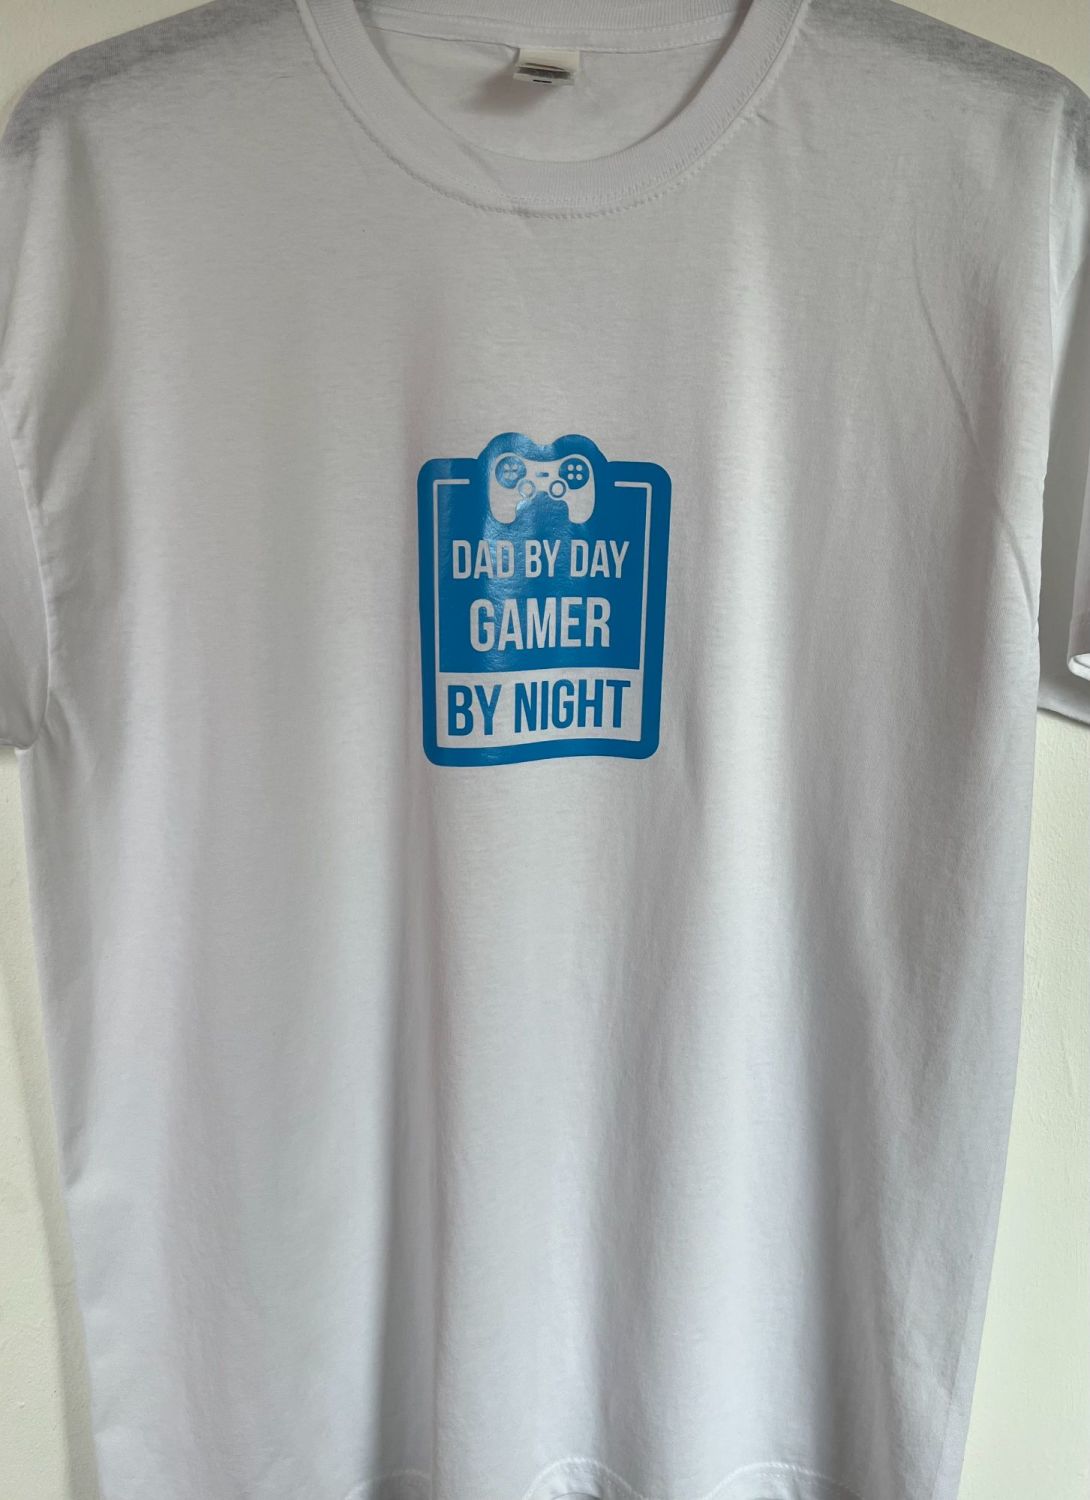 Hand Crafted Customisable Men's Top - Dad By Day, Gamer By Night T Shirt - 